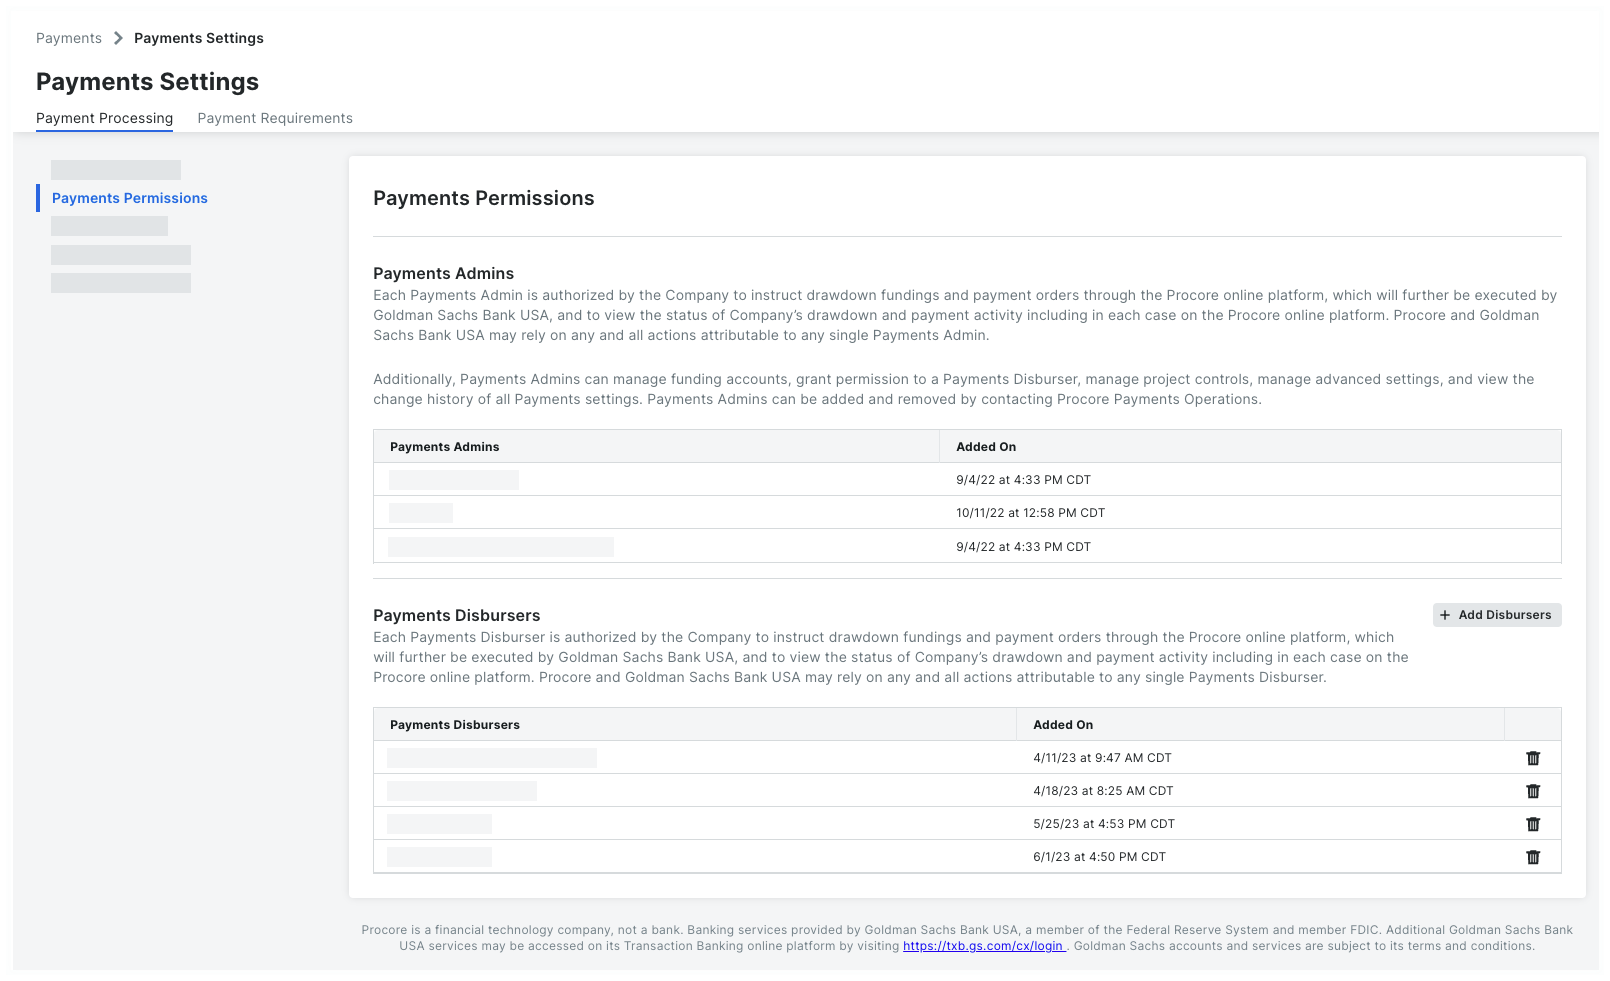 payments-settings-payments-permissions.png